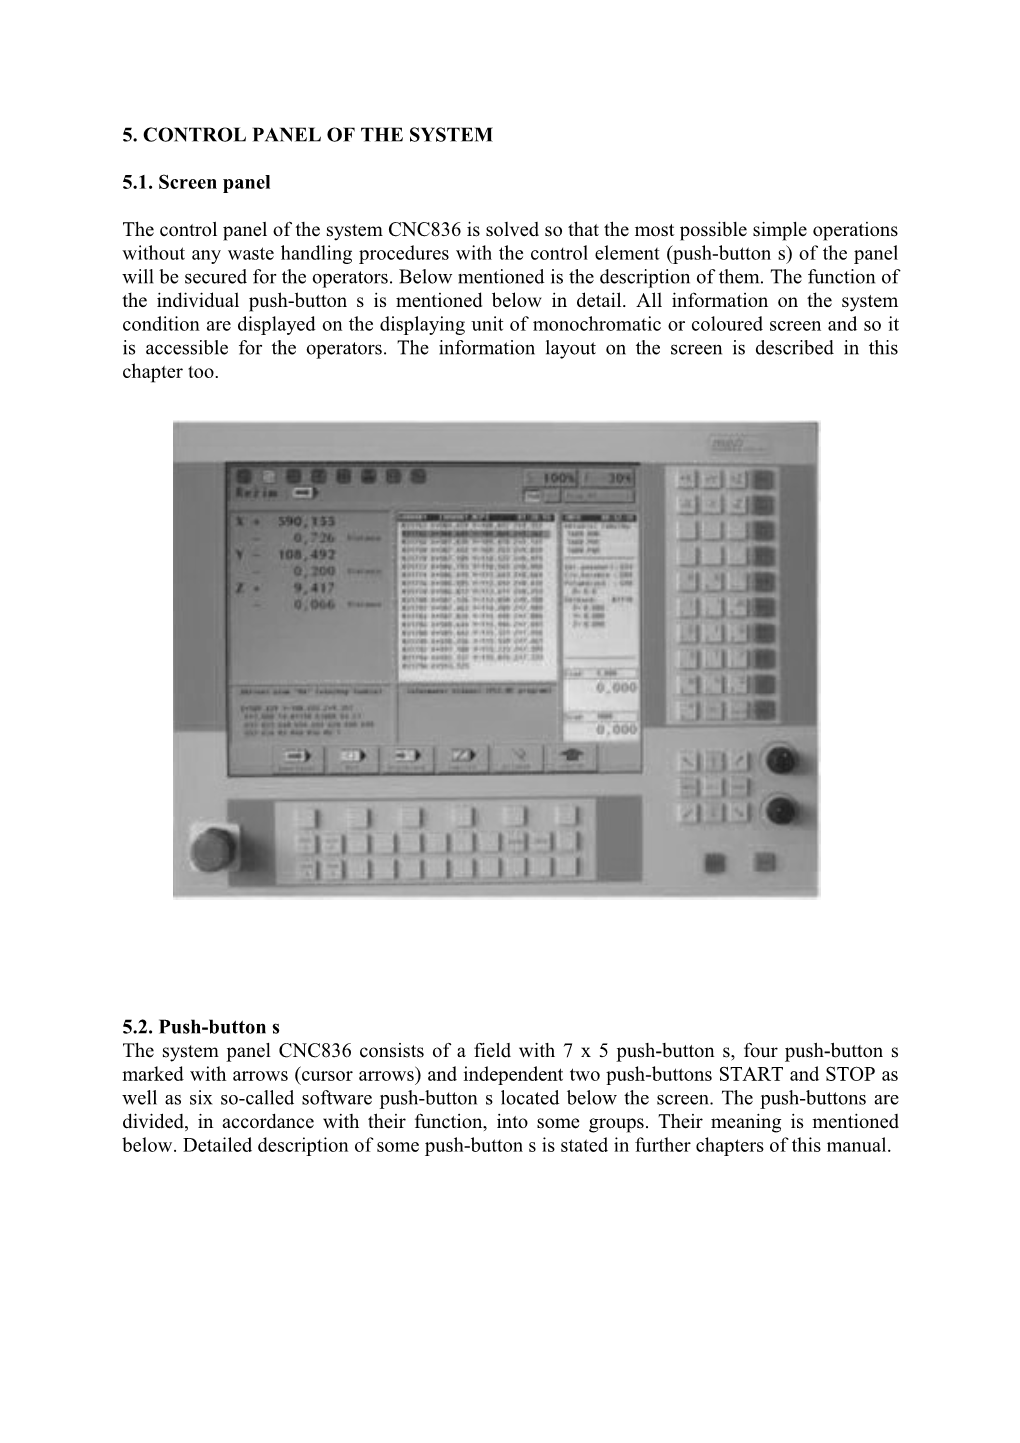 5. Control Panel of the System